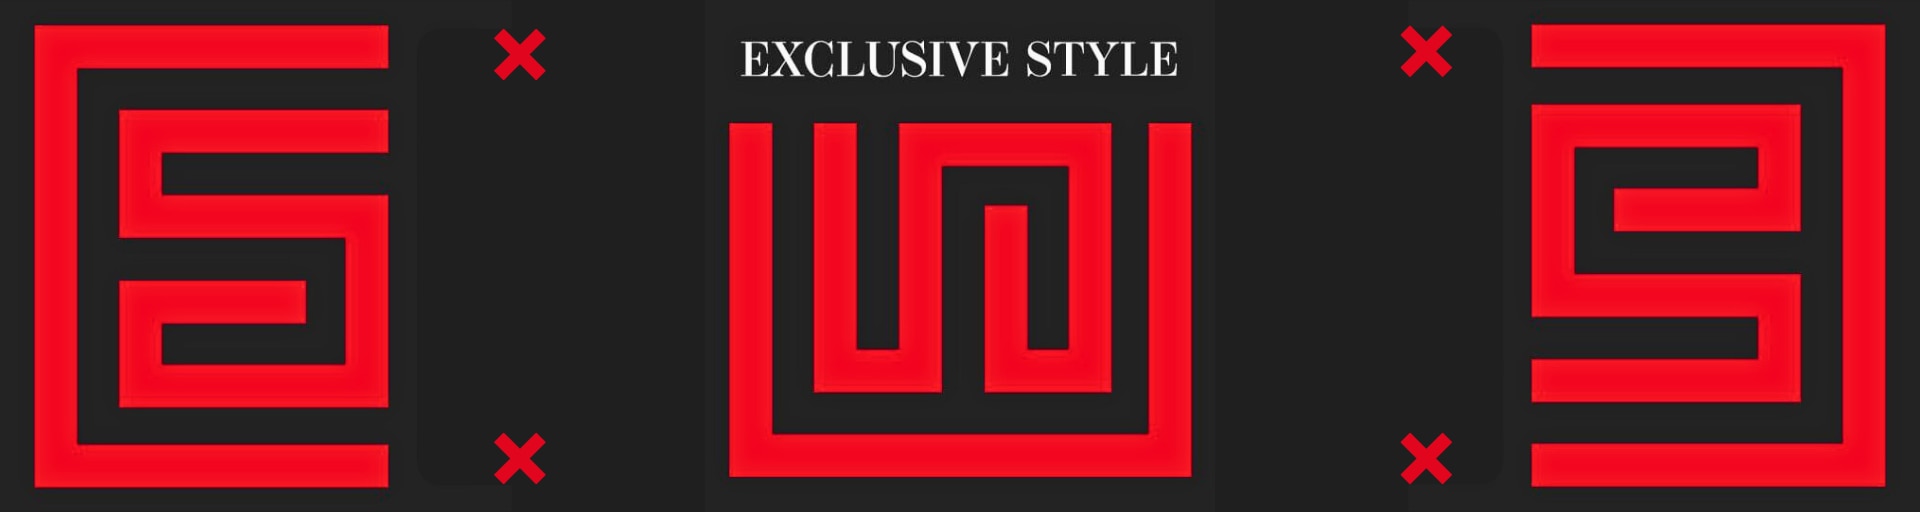 Exclusive Style